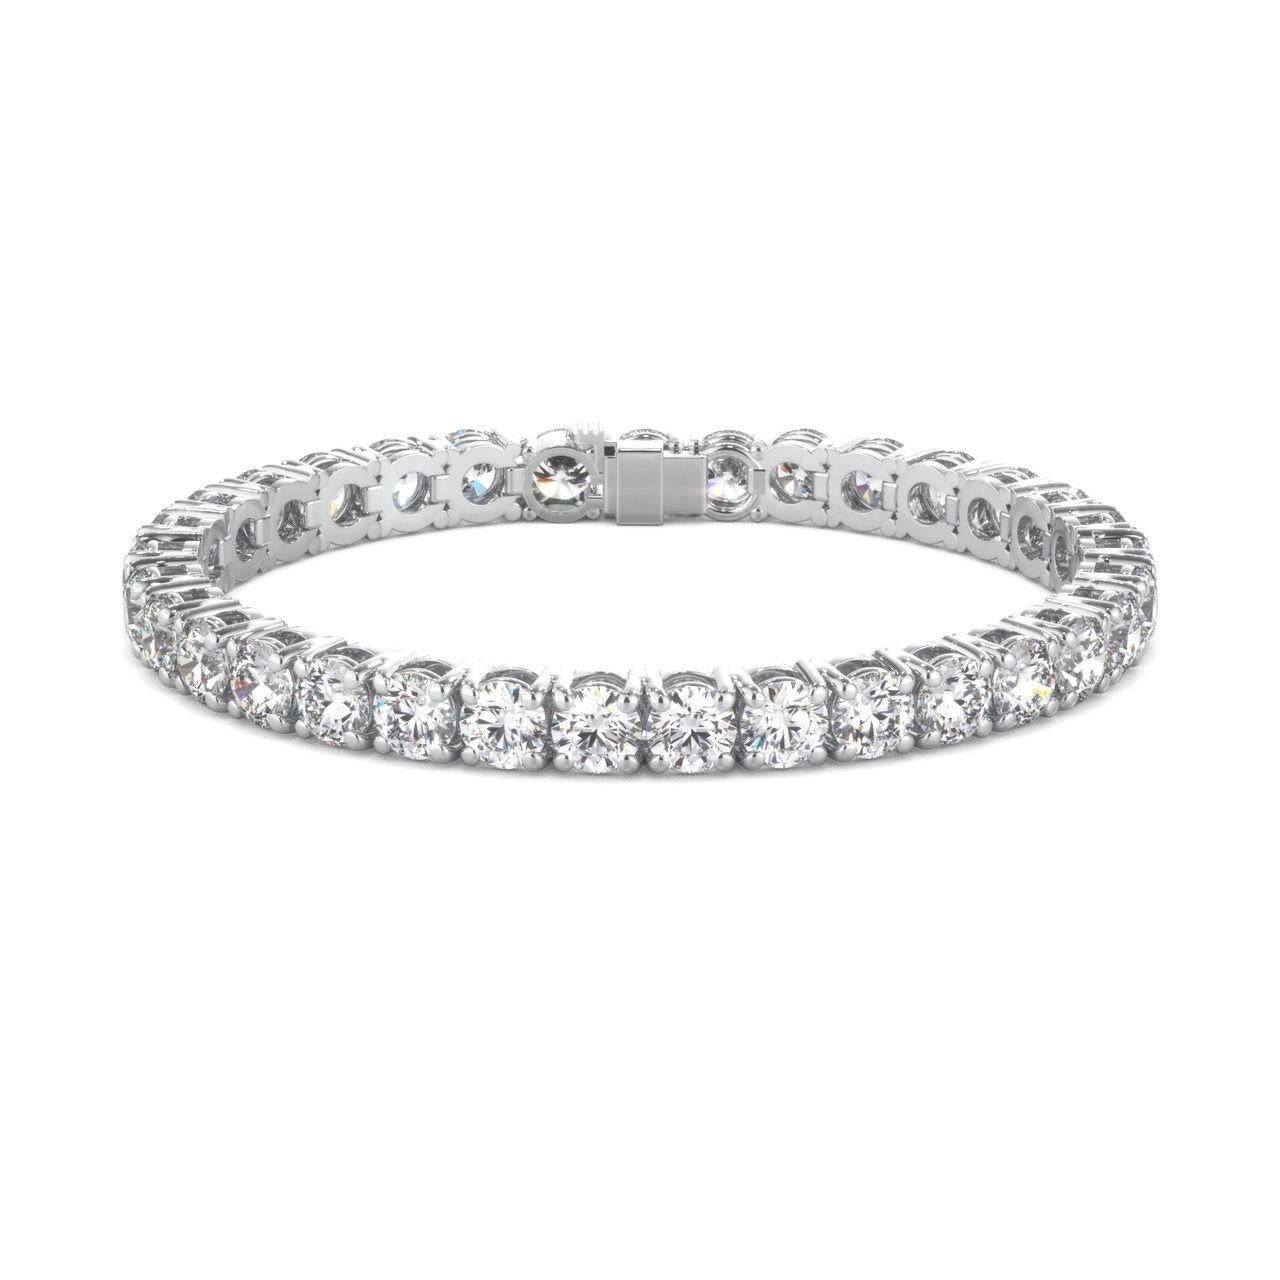 Customized 5.50 Carat Round Cut Diamond White Gold Bracelet F VS In New Condition For Sale In Rome, IT